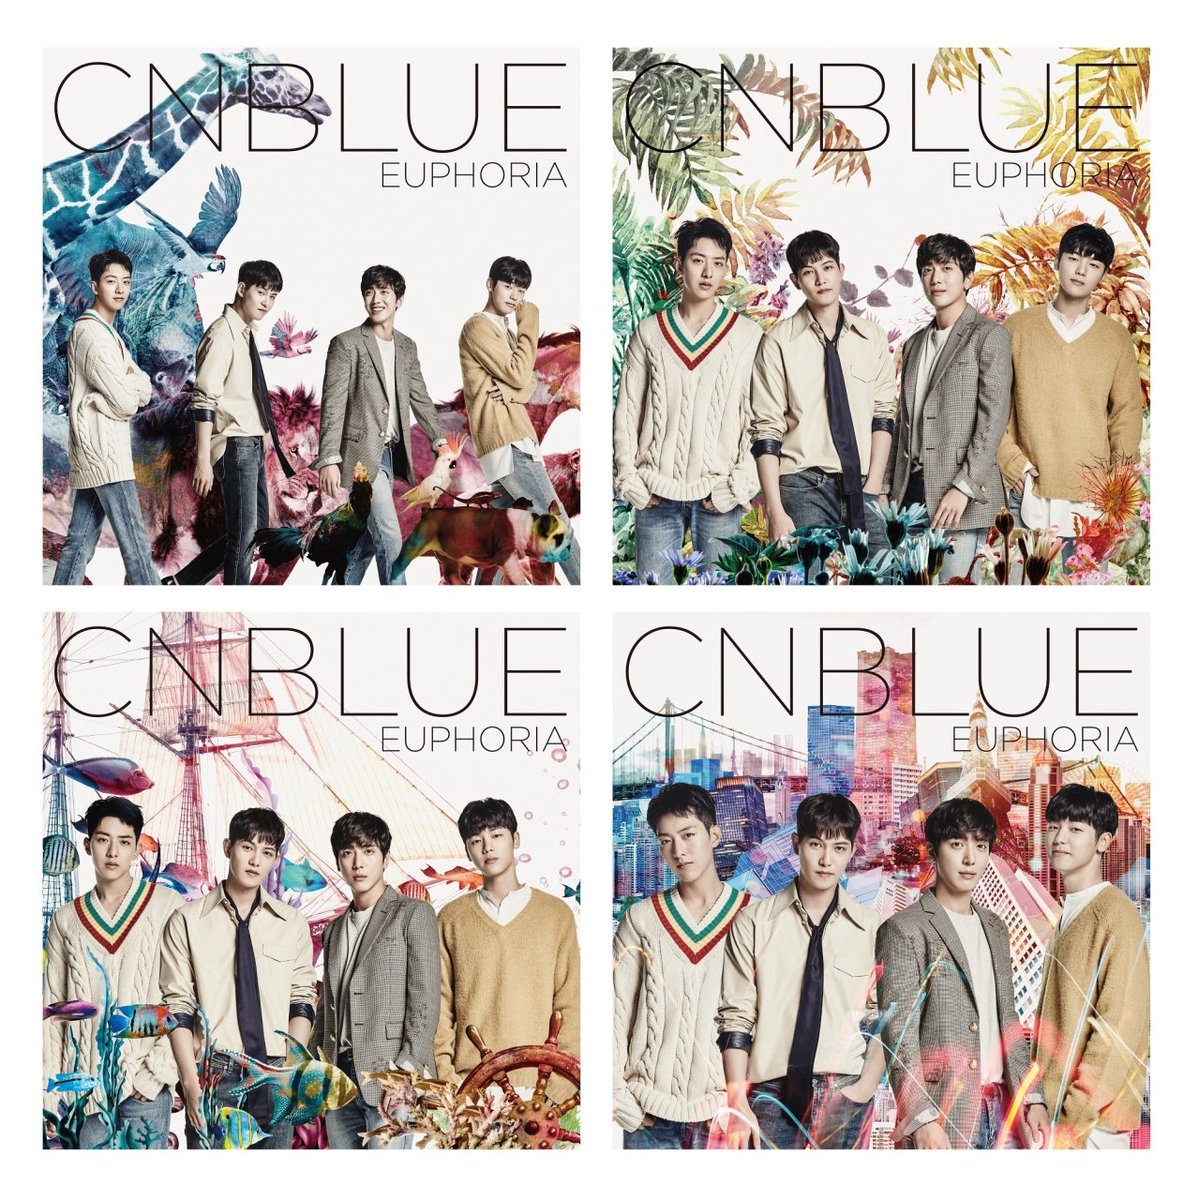 Name Cannot Be Blank Cnblue New Album Japan Euphoria Tittle Song Our Glory Days On 19 Oct 16 Cnblueで妄想 Cnblue